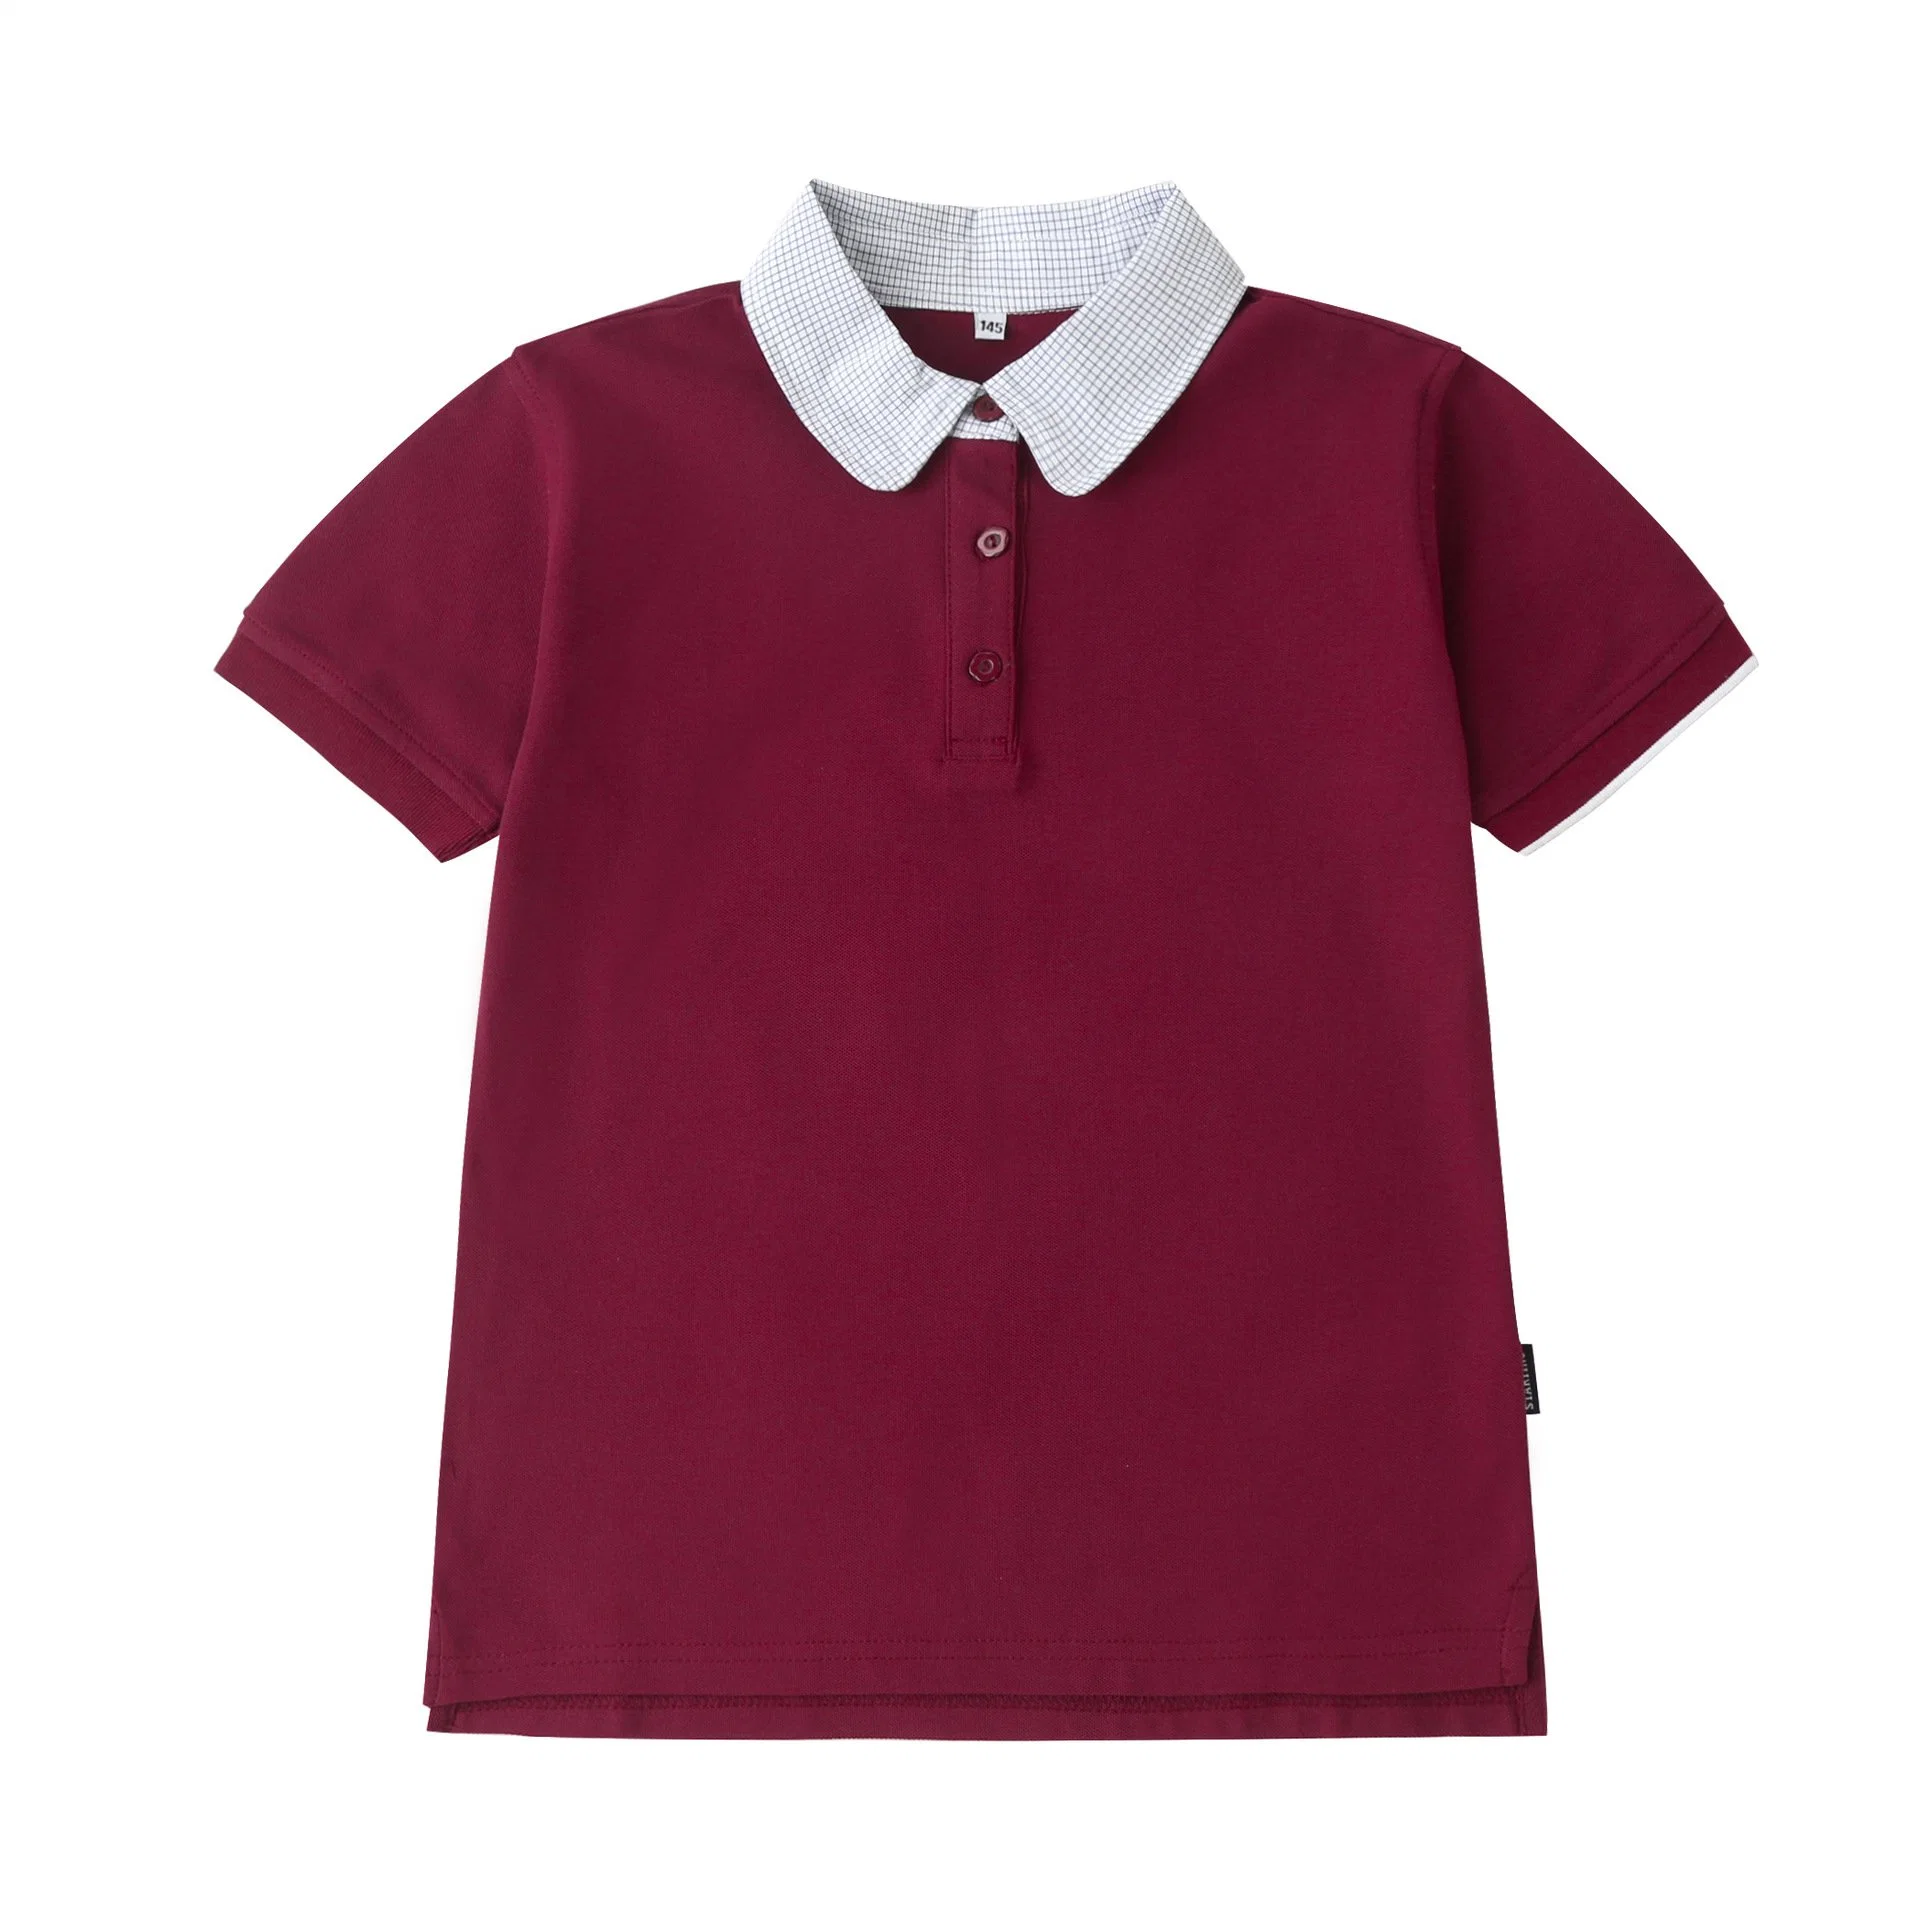 OEM Customized British Style High Quality Short Sleeve Burgundy Color for Kindergarten Primary and Secondary School Polo Shirts School Uniform